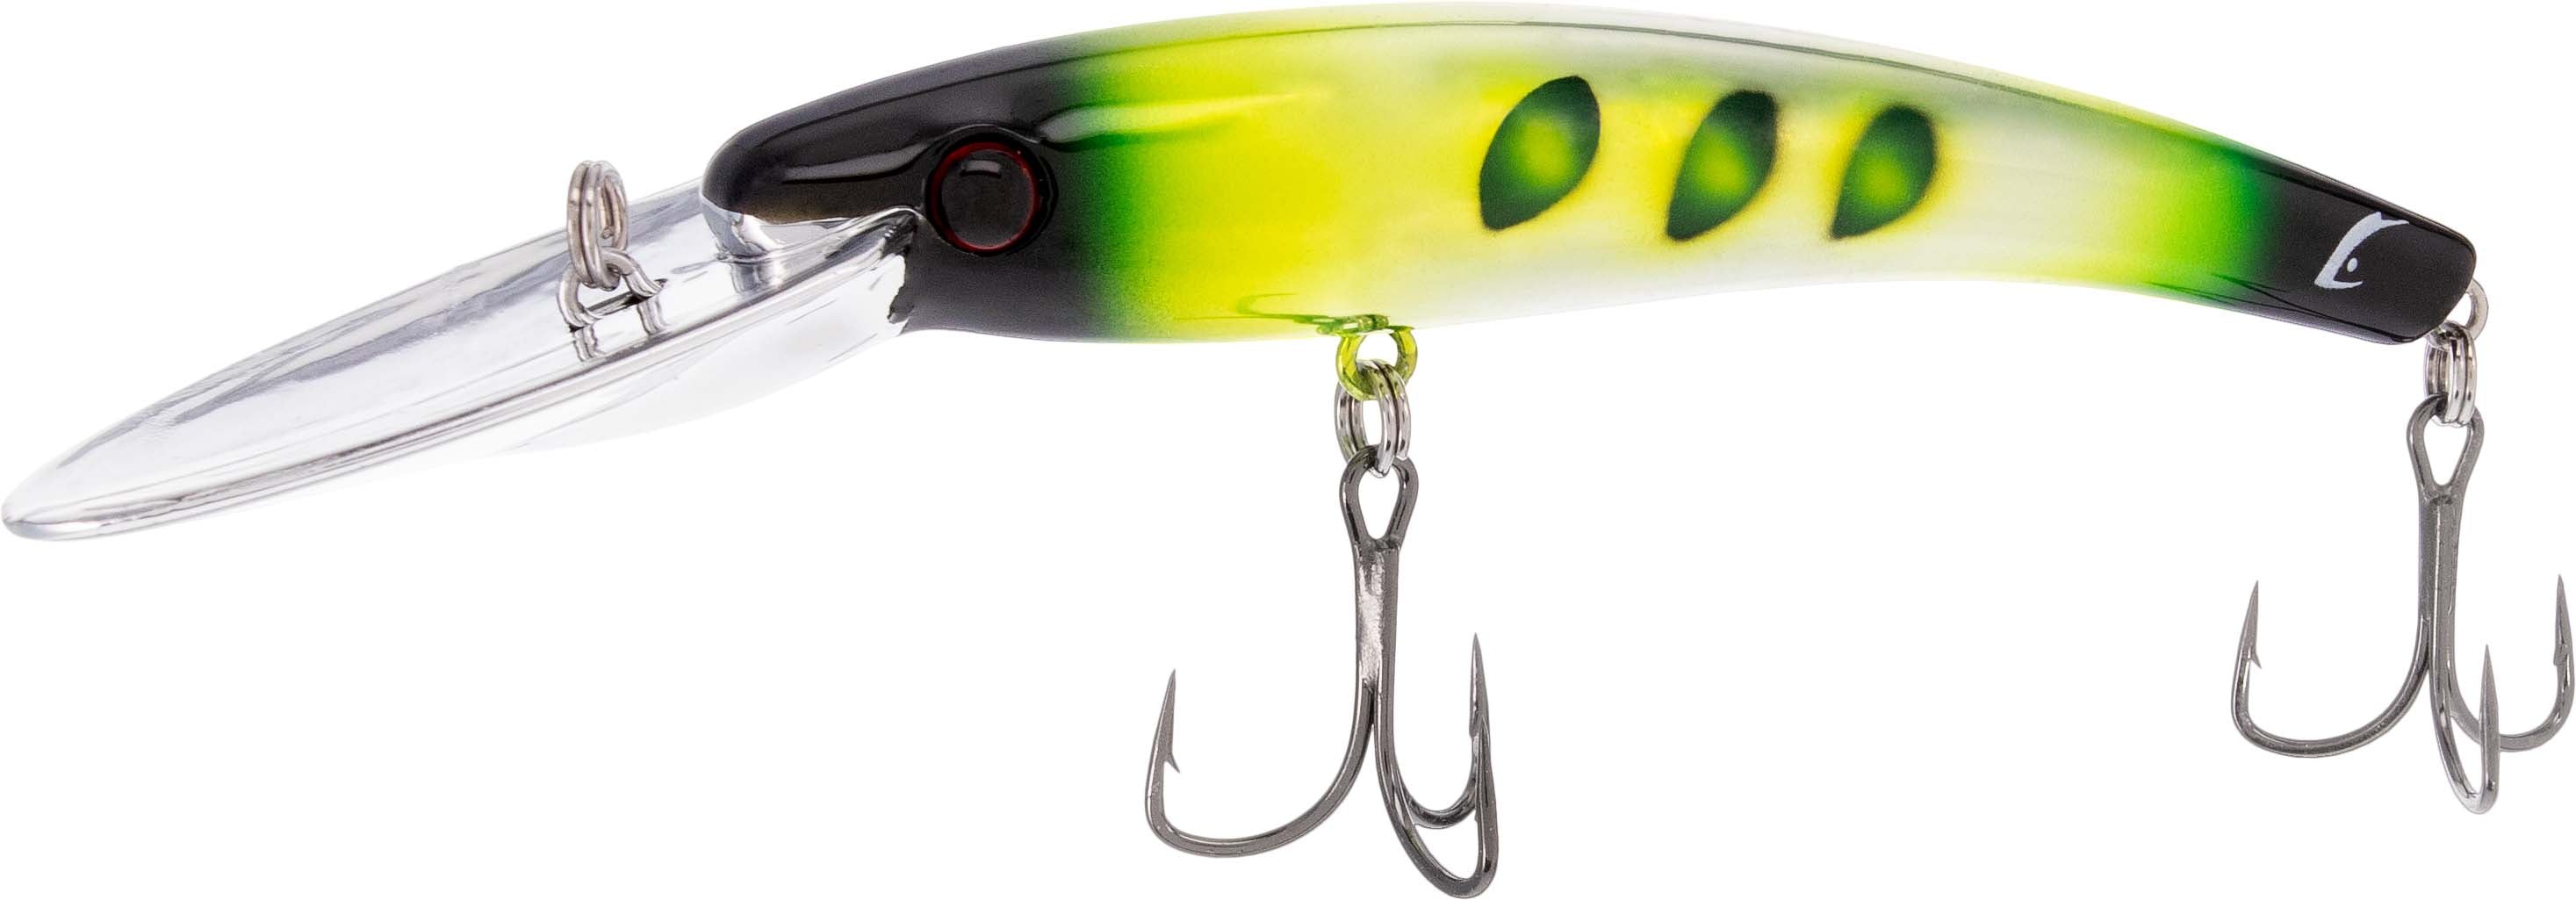 Bill Lewis Precise Walleye Crank Light (PWCL) — Discount Tackle